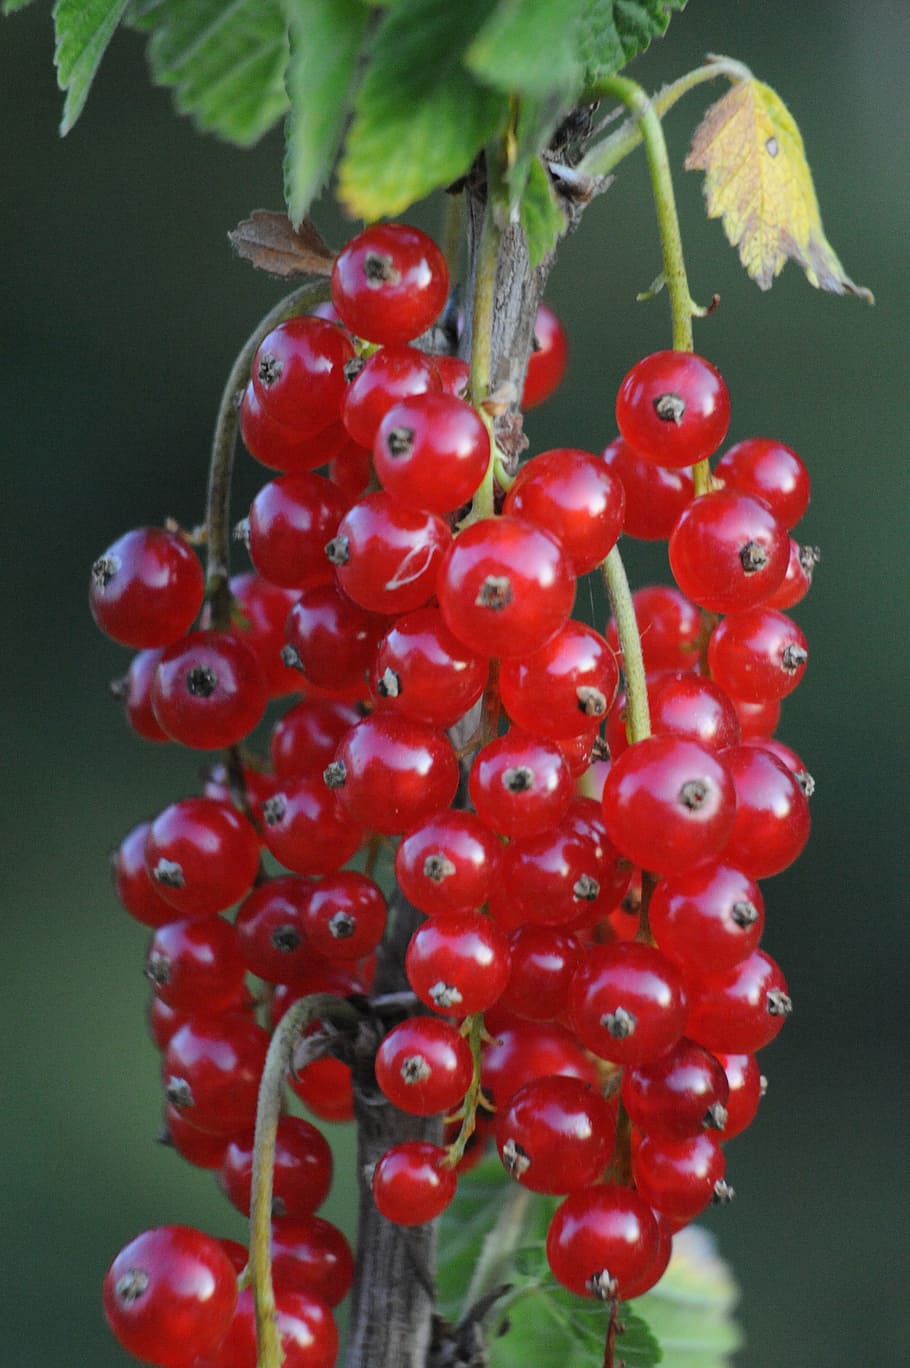 currant, fruits, fruit, berries, red currant, food, red, food and drink, healthy eating, freshness